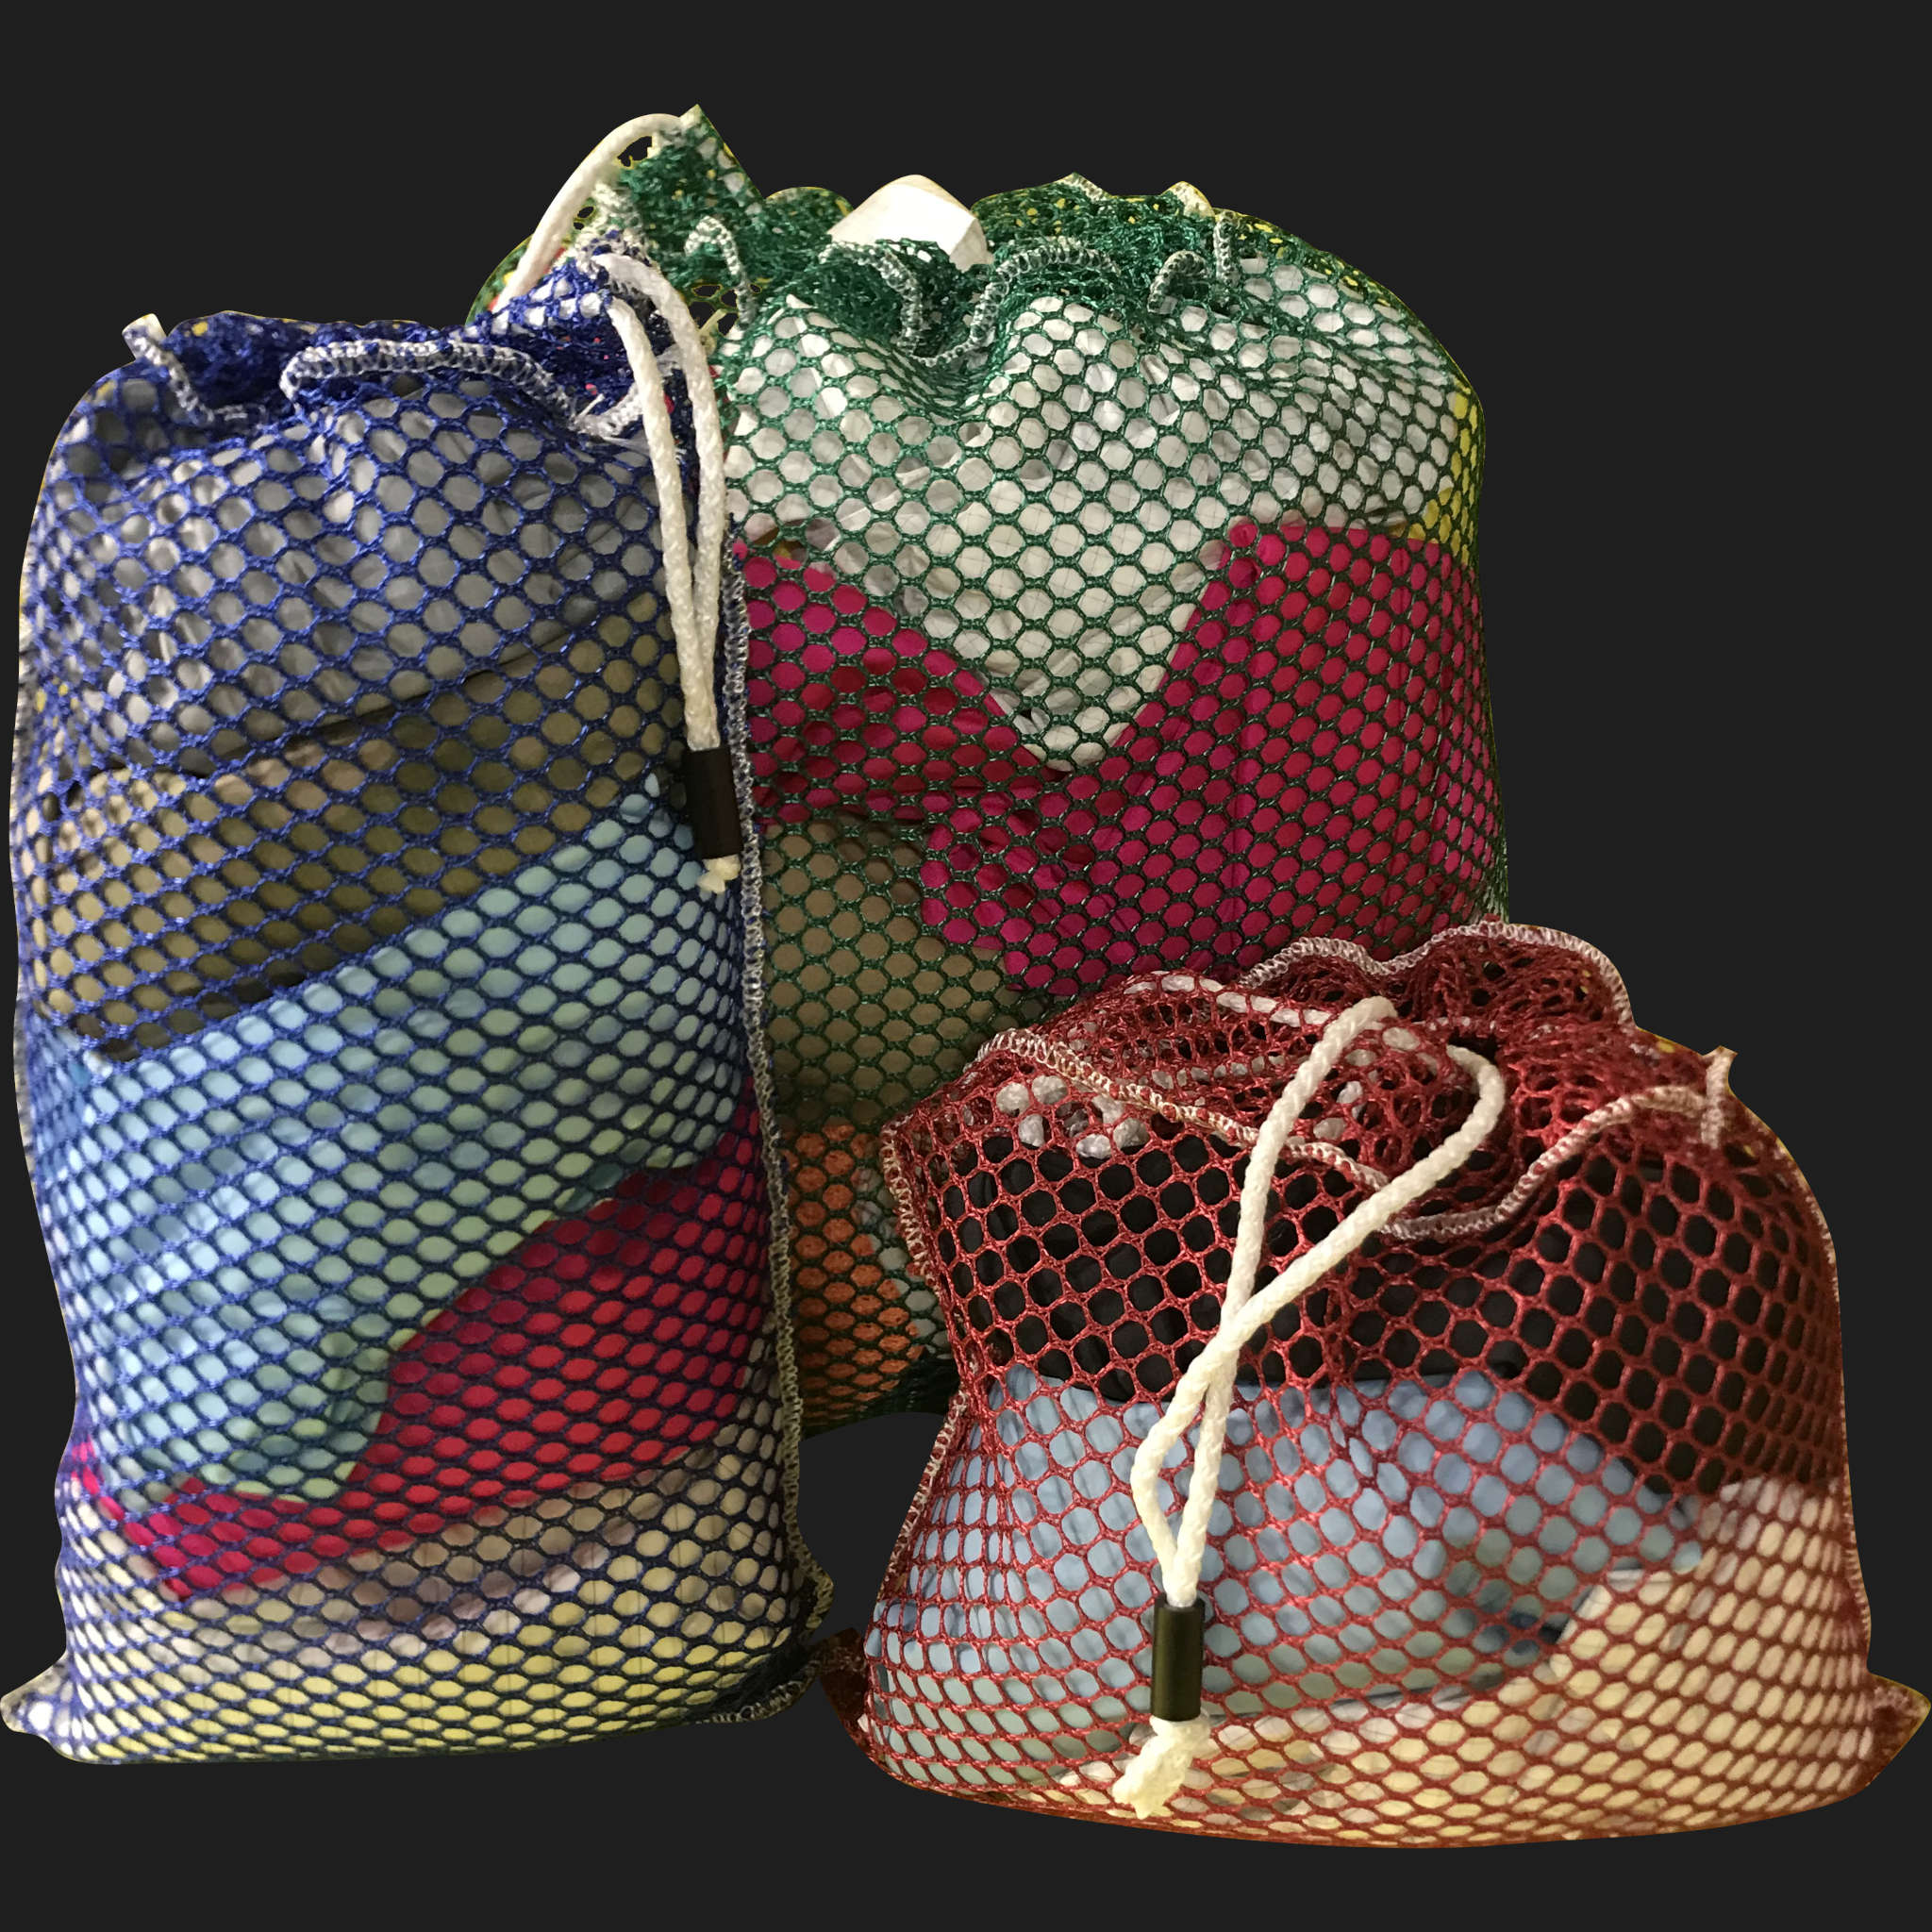 34" x 42" Customized Mesh-Net-Laundry Bags Heavy Duty with Cord and barrellock closure